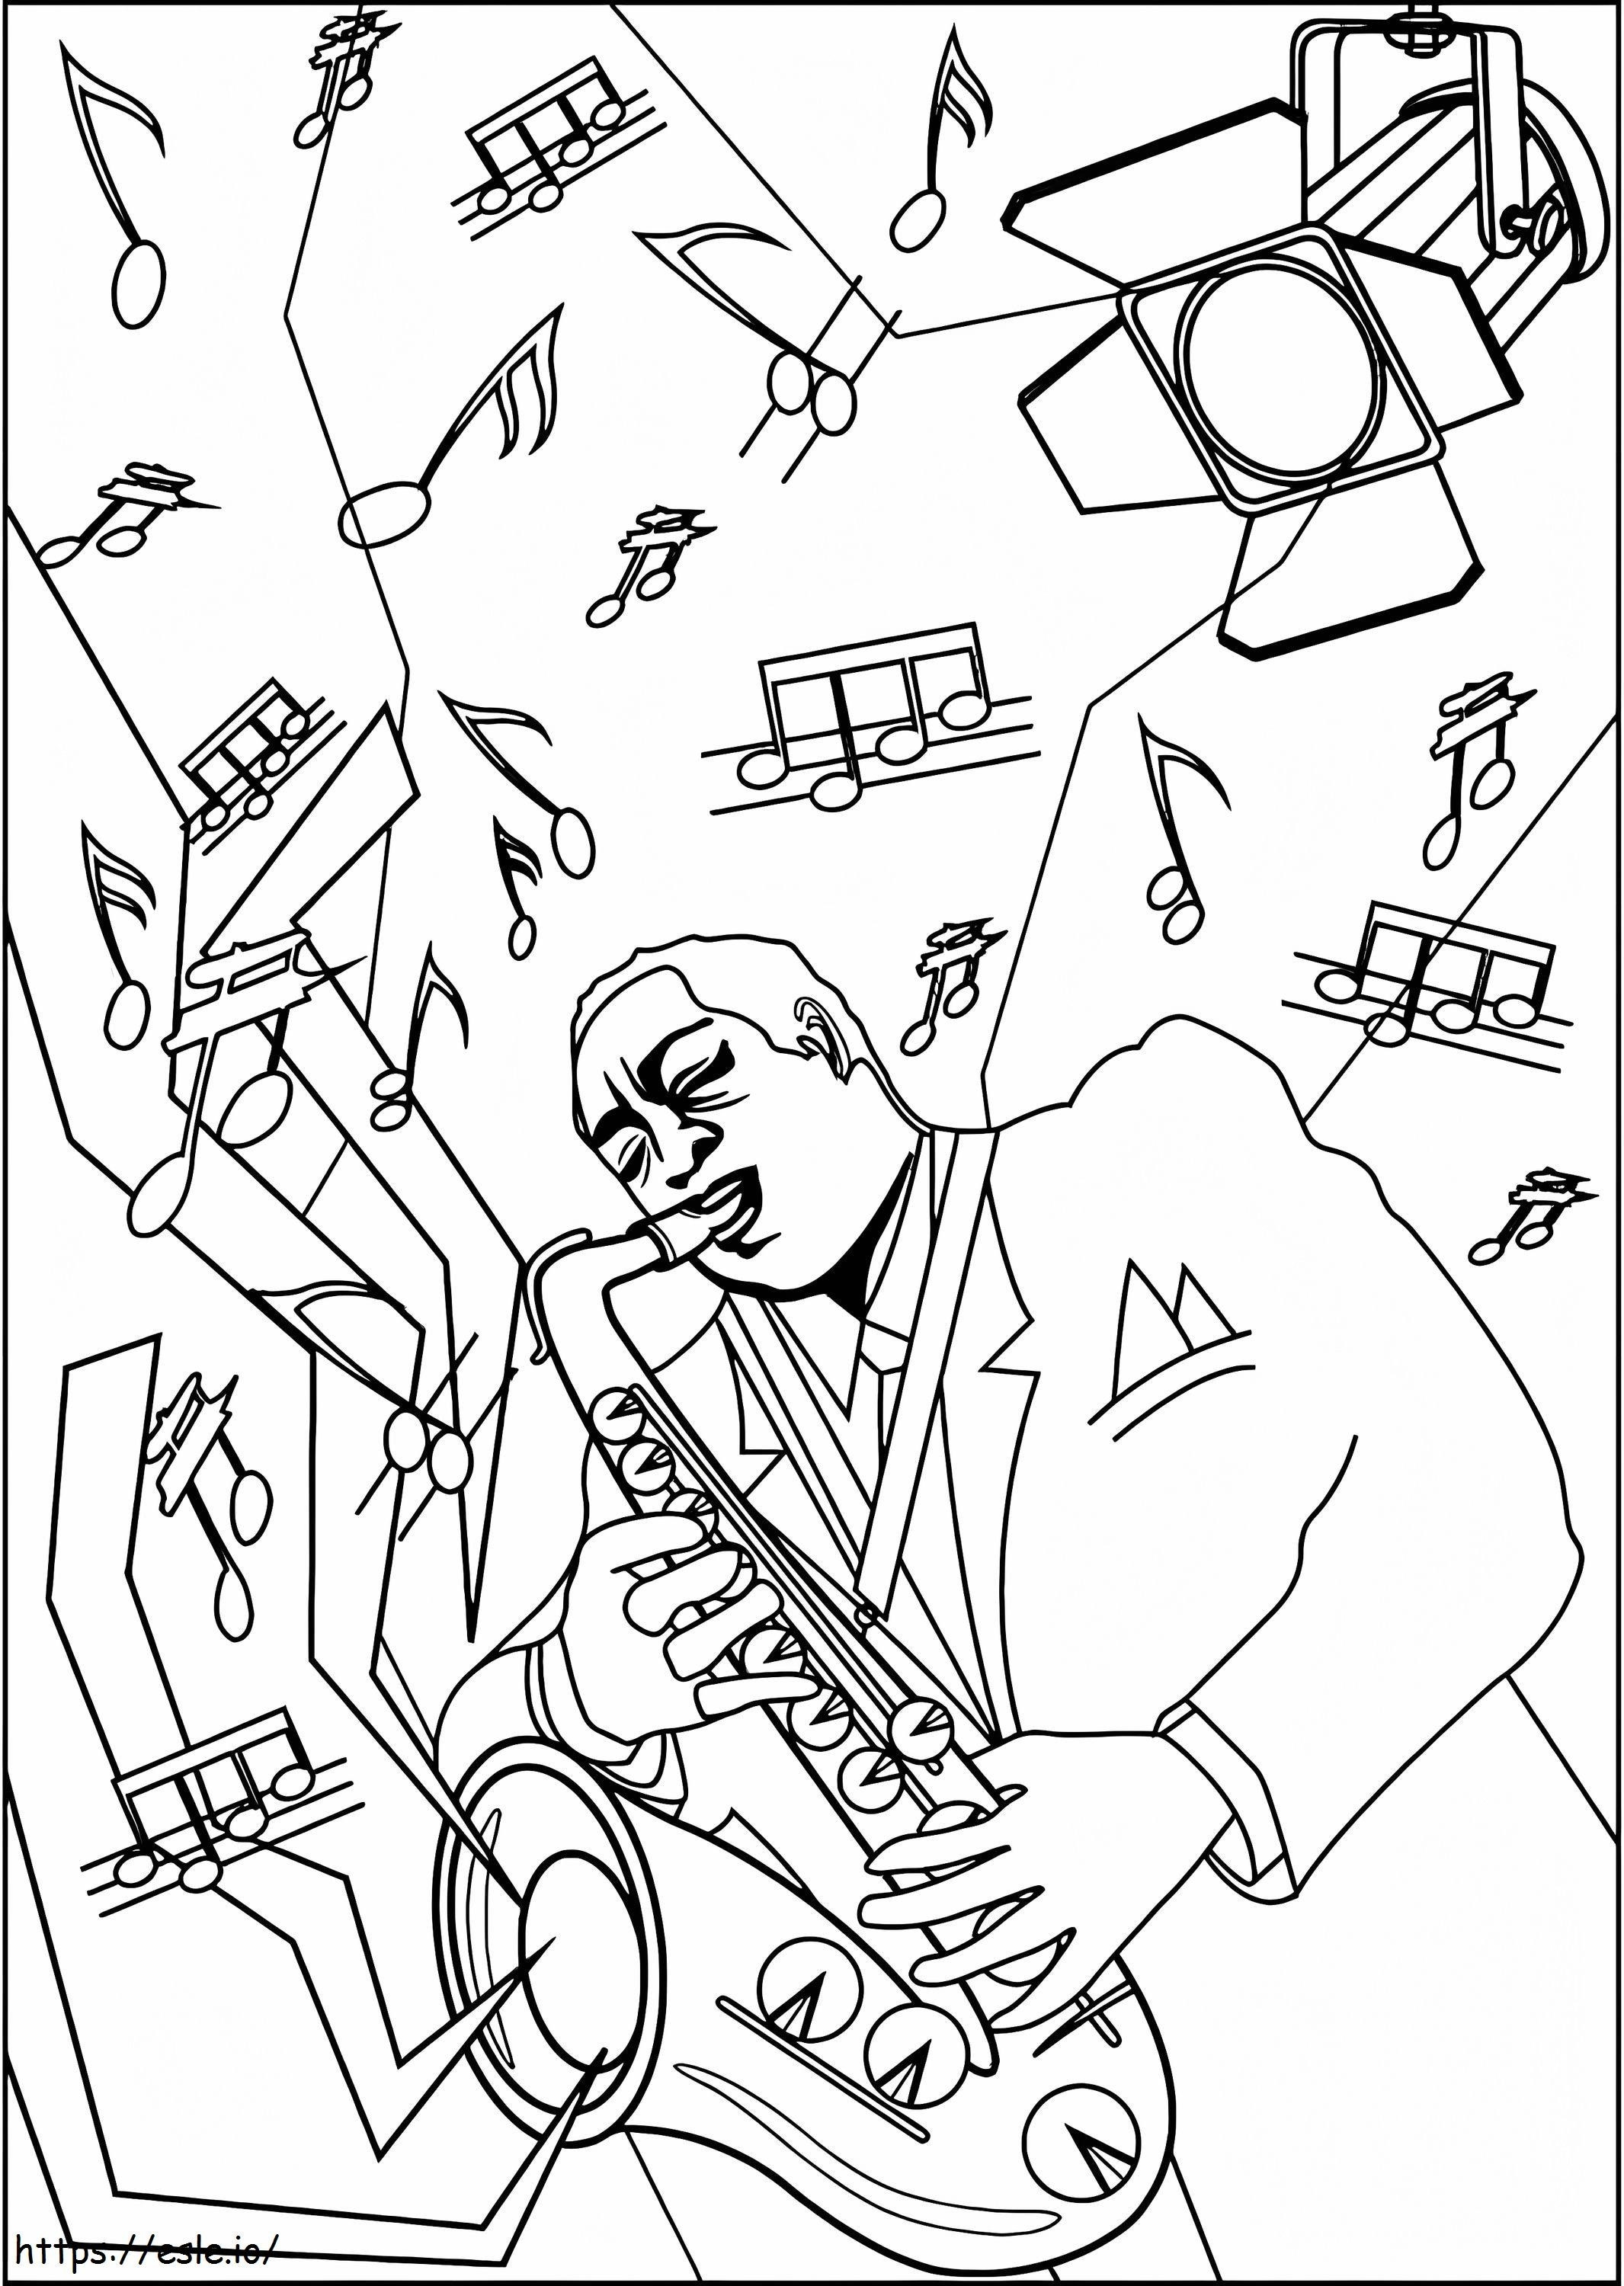 Saxophonist Man Face coloring page